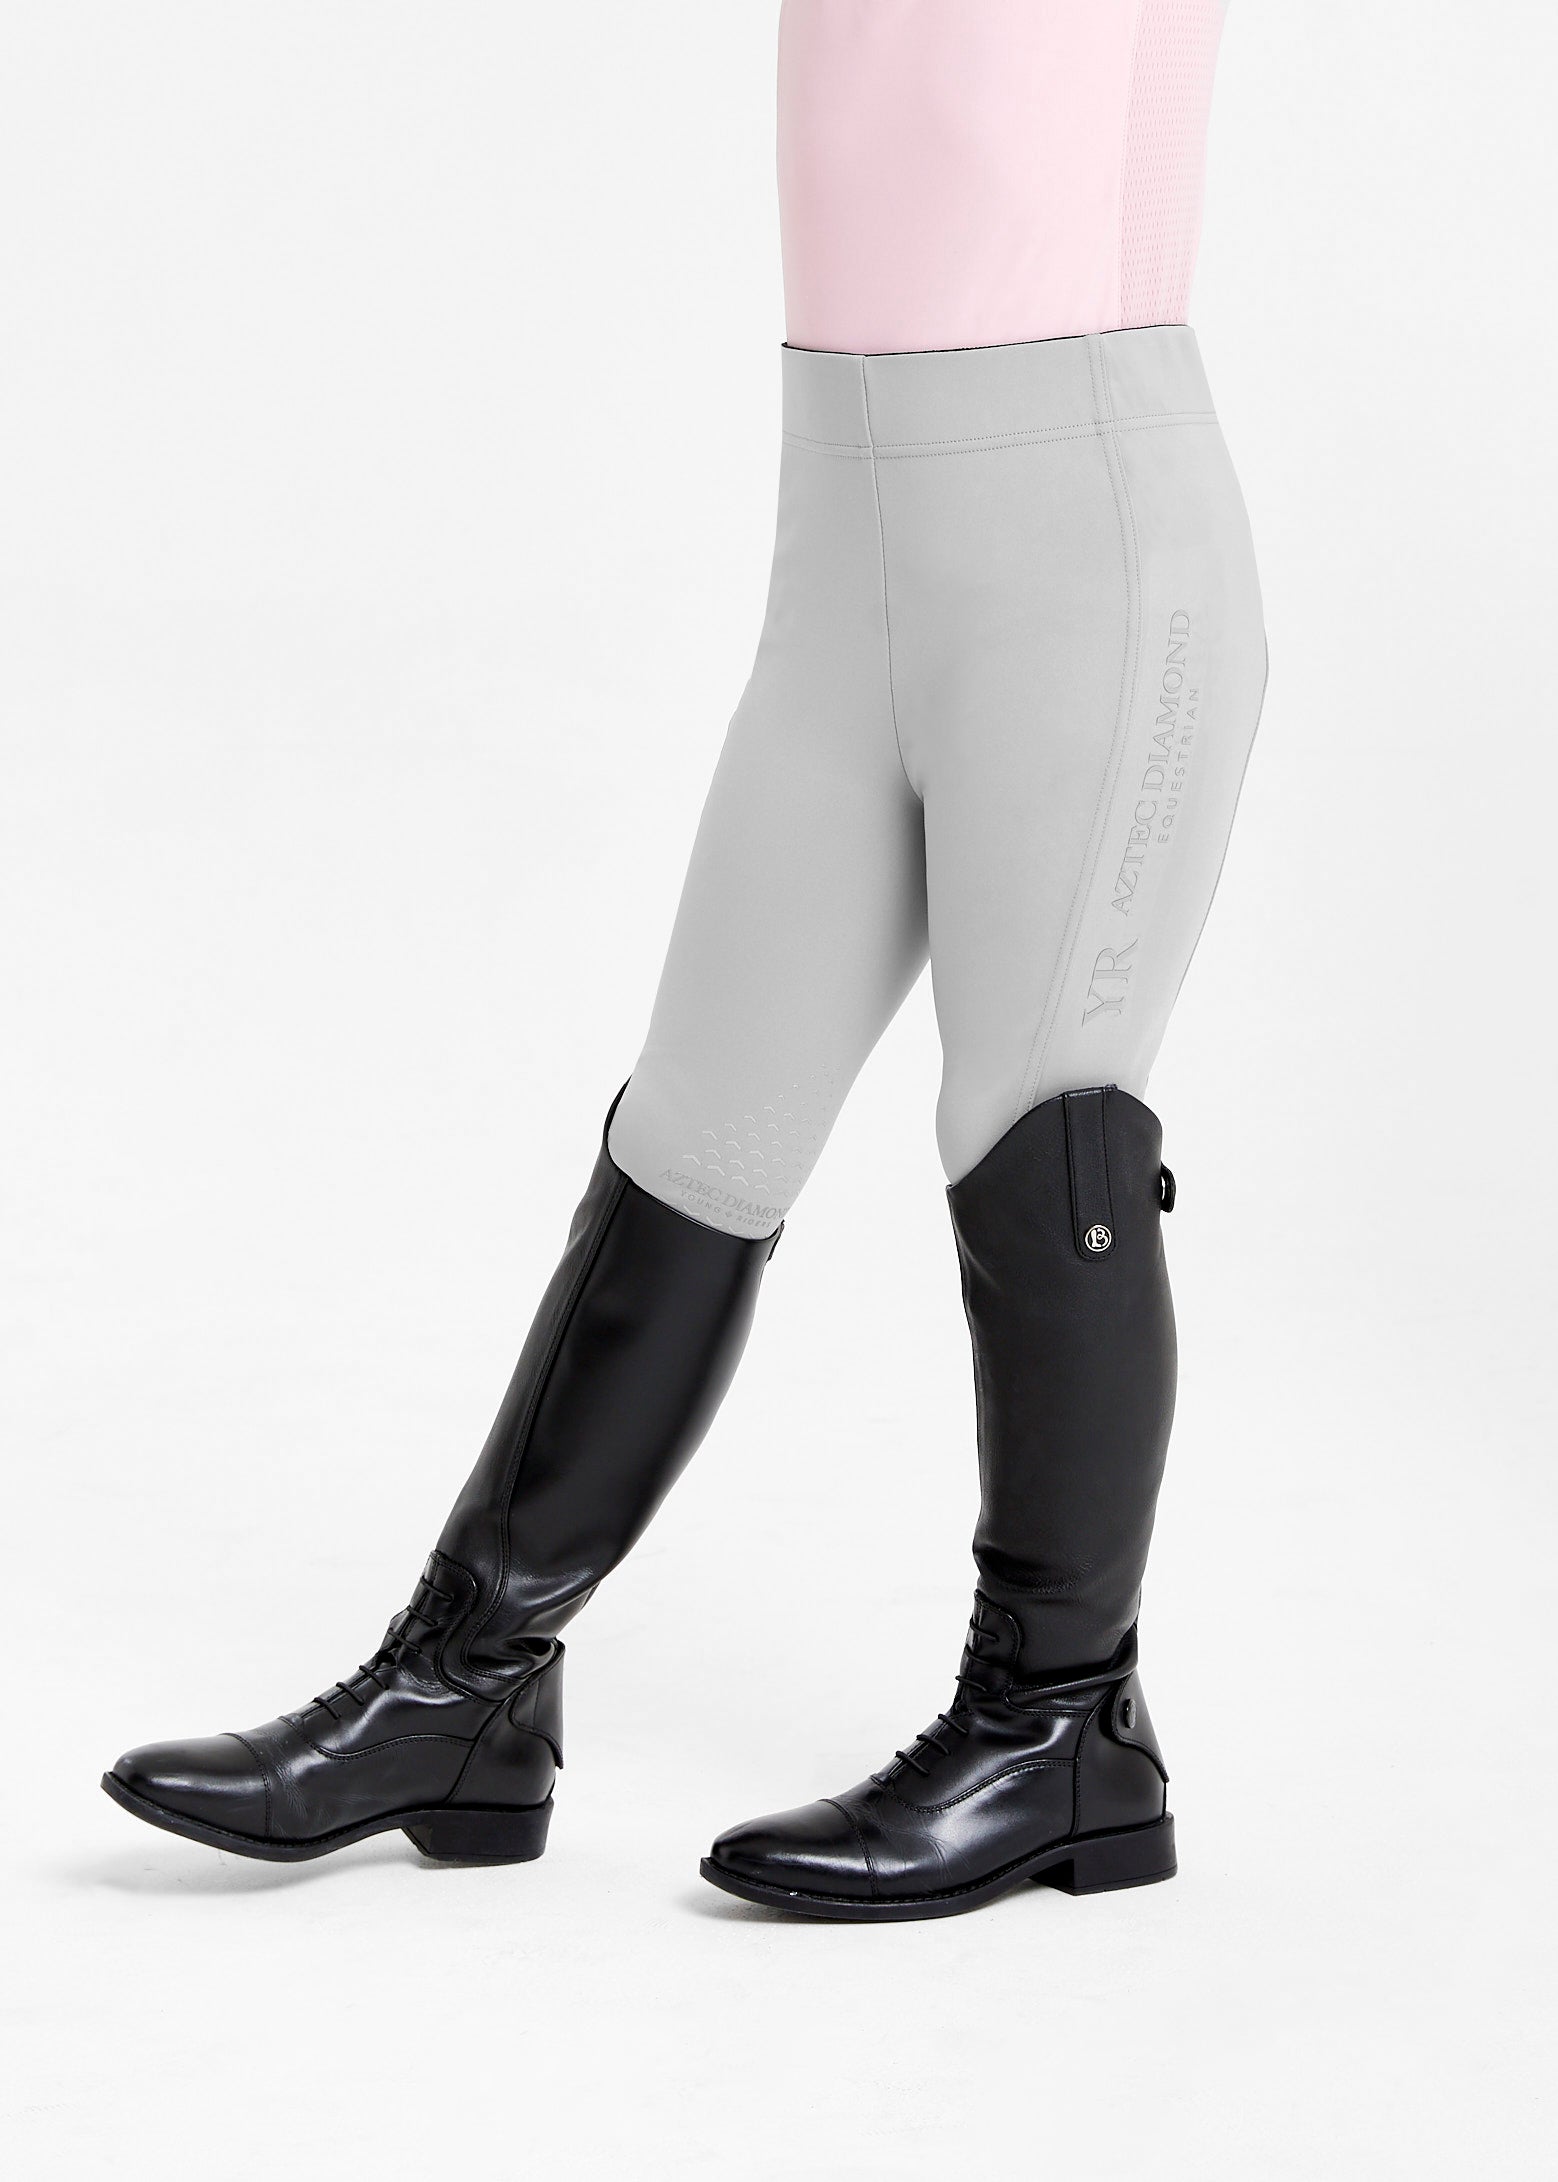 DISRUPT Summer Riding Tights Non Stick - excelequine